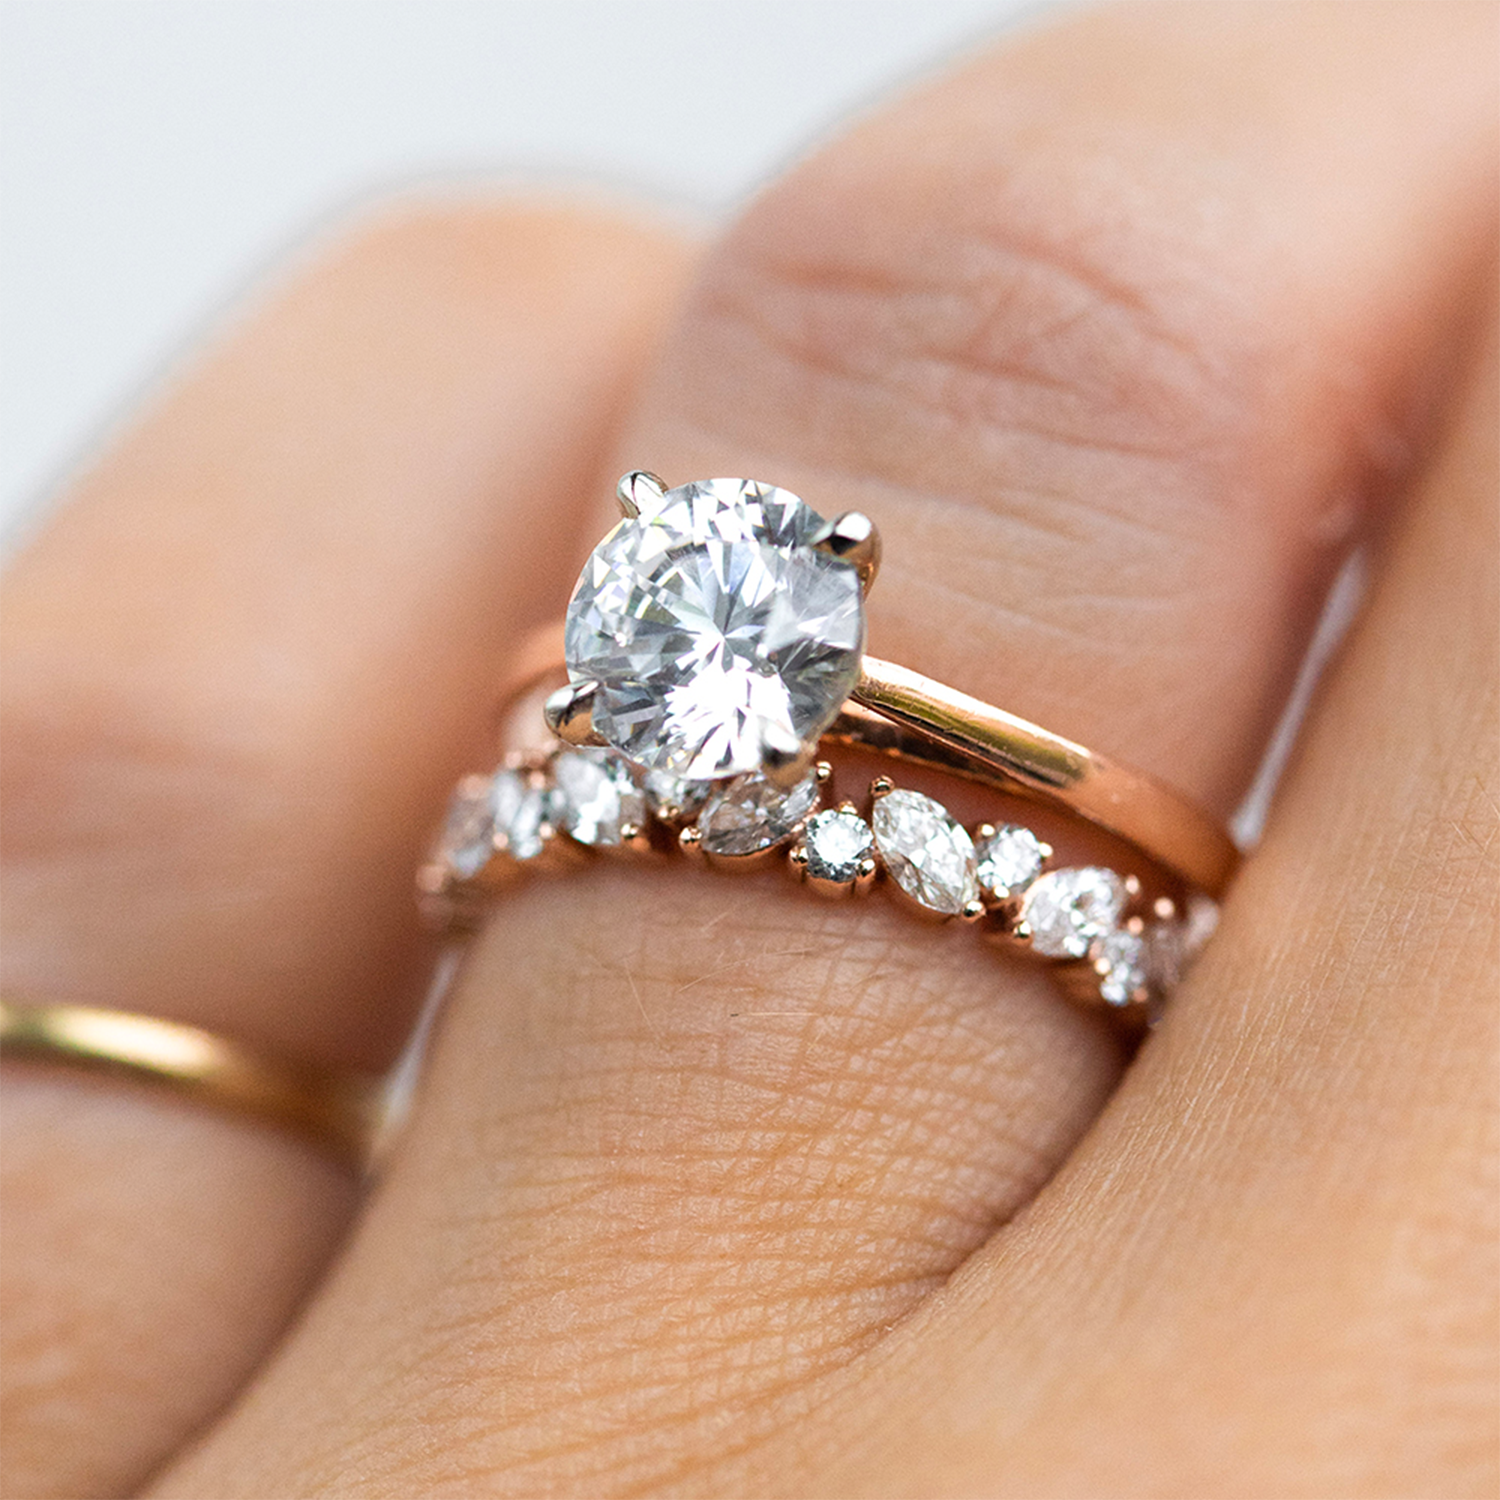 Oval Engagement ring with Wedding Bands : r/EngagementRings